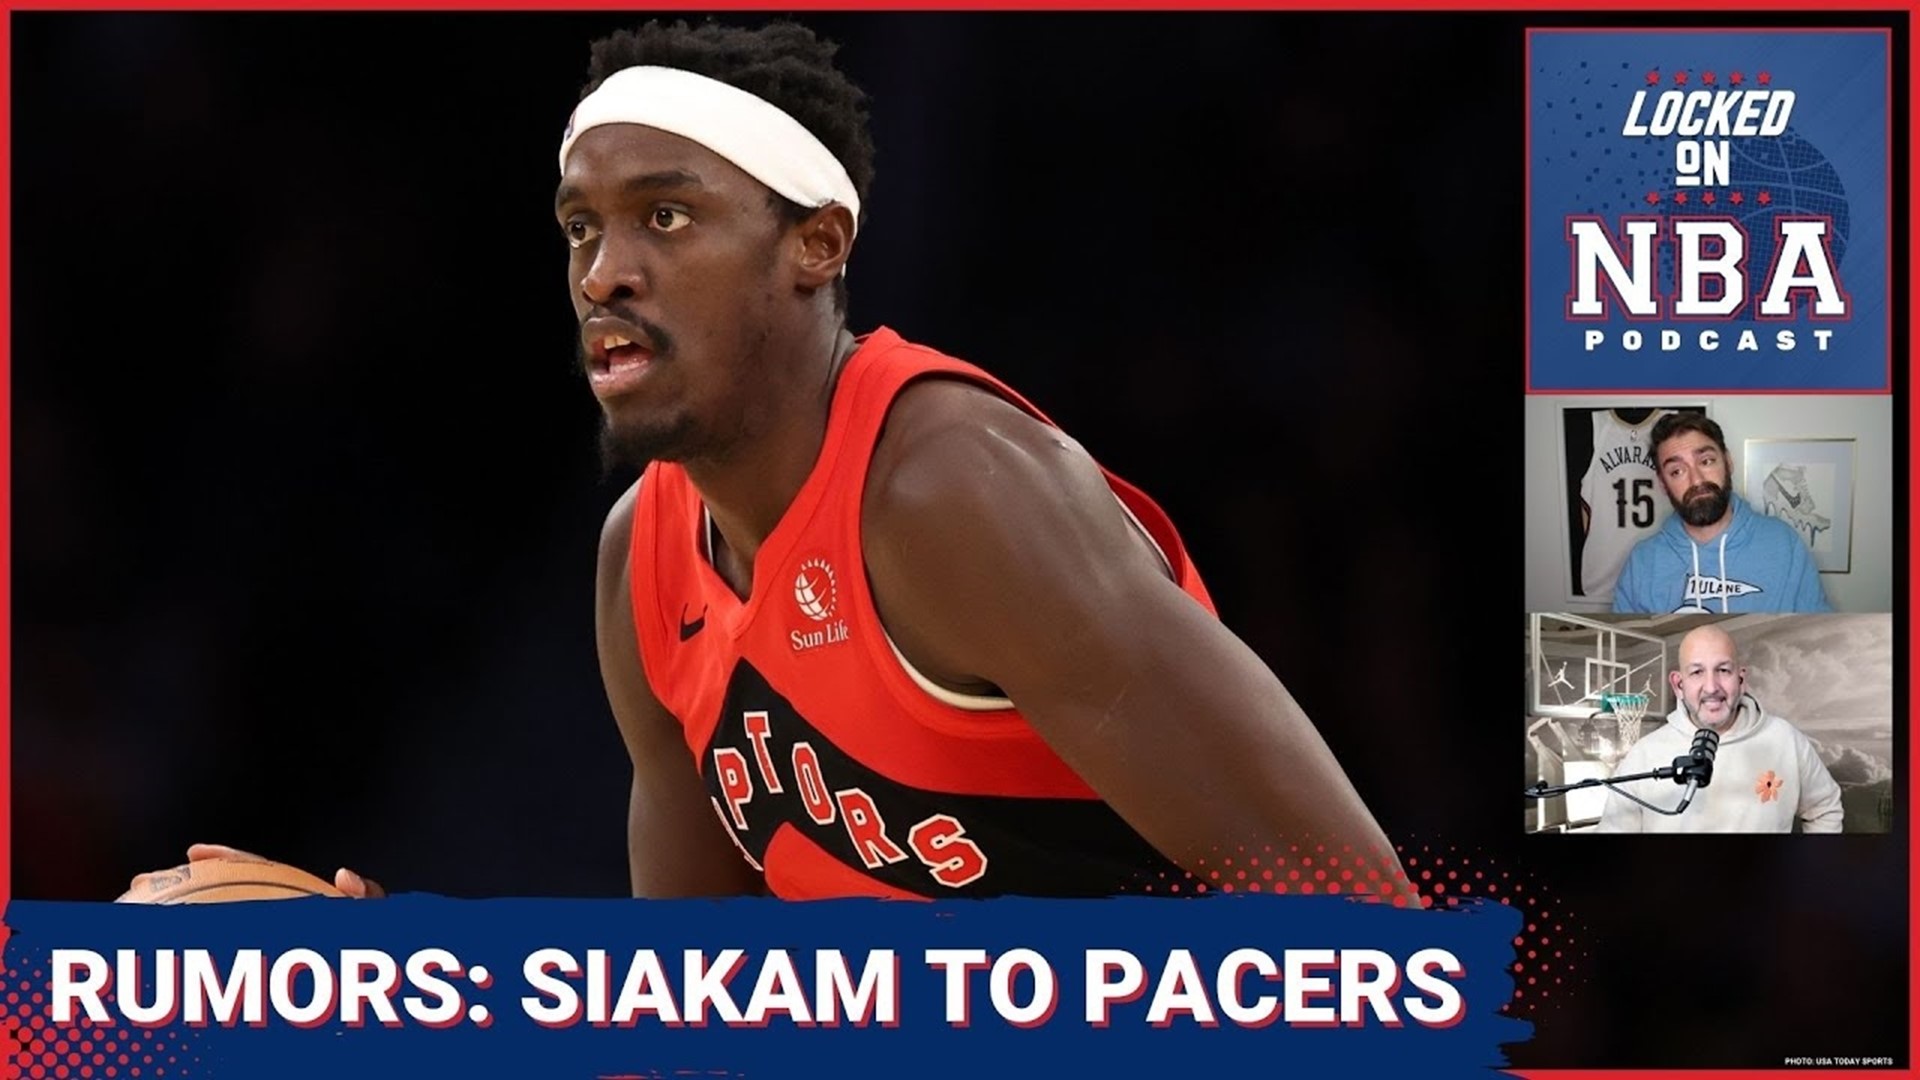 The latest NBA trade rumors have the Indiana Pacers making a move for the Toronto Raptors' Pascal Siakam.